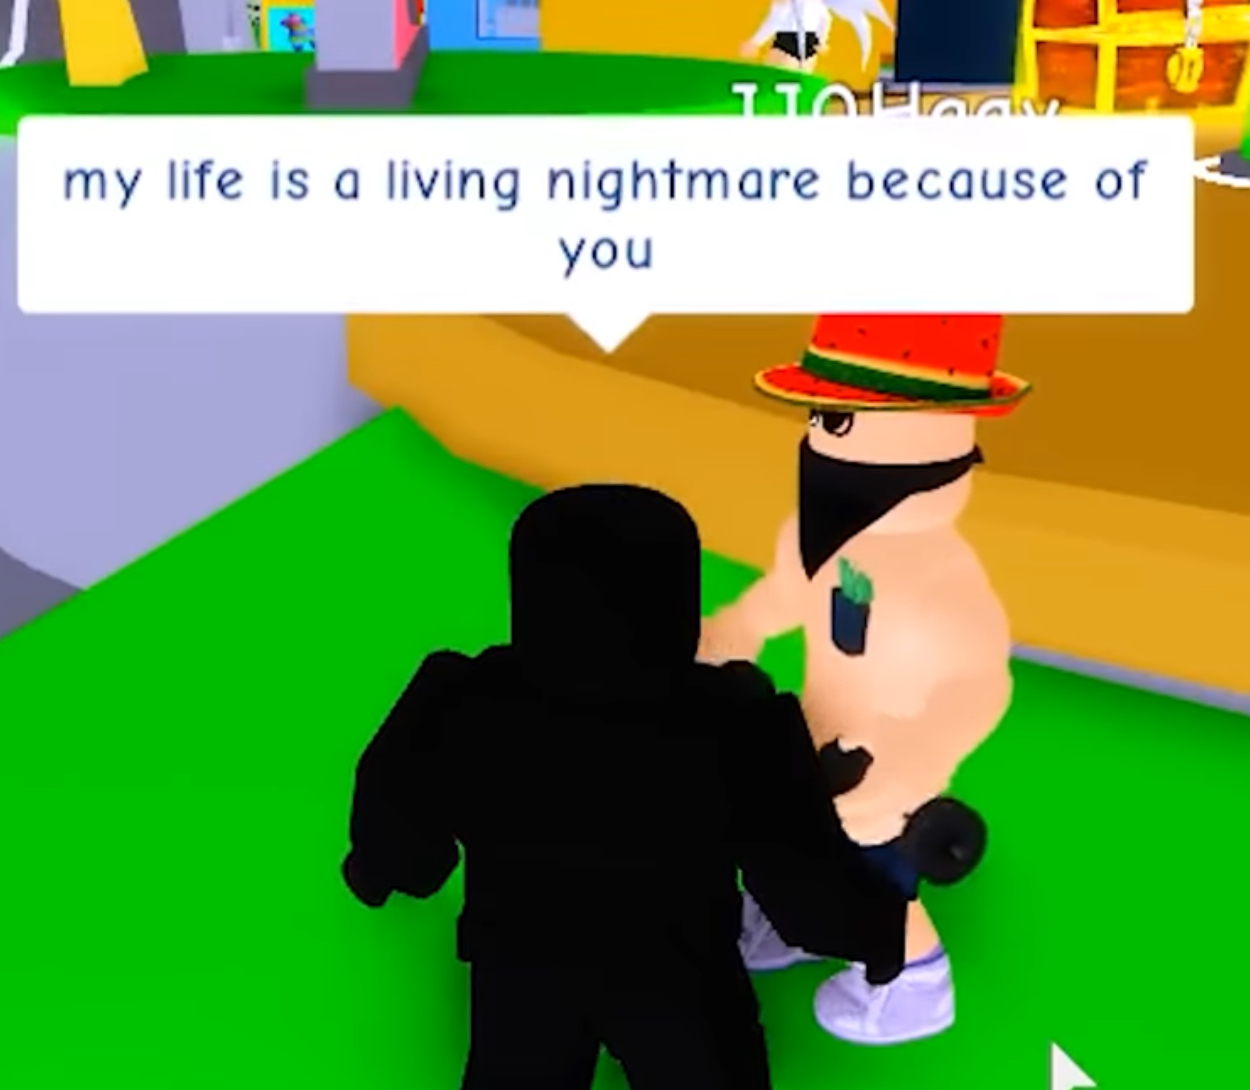 Oh damn  Roblox funny, Roblox memes, Really funny memes